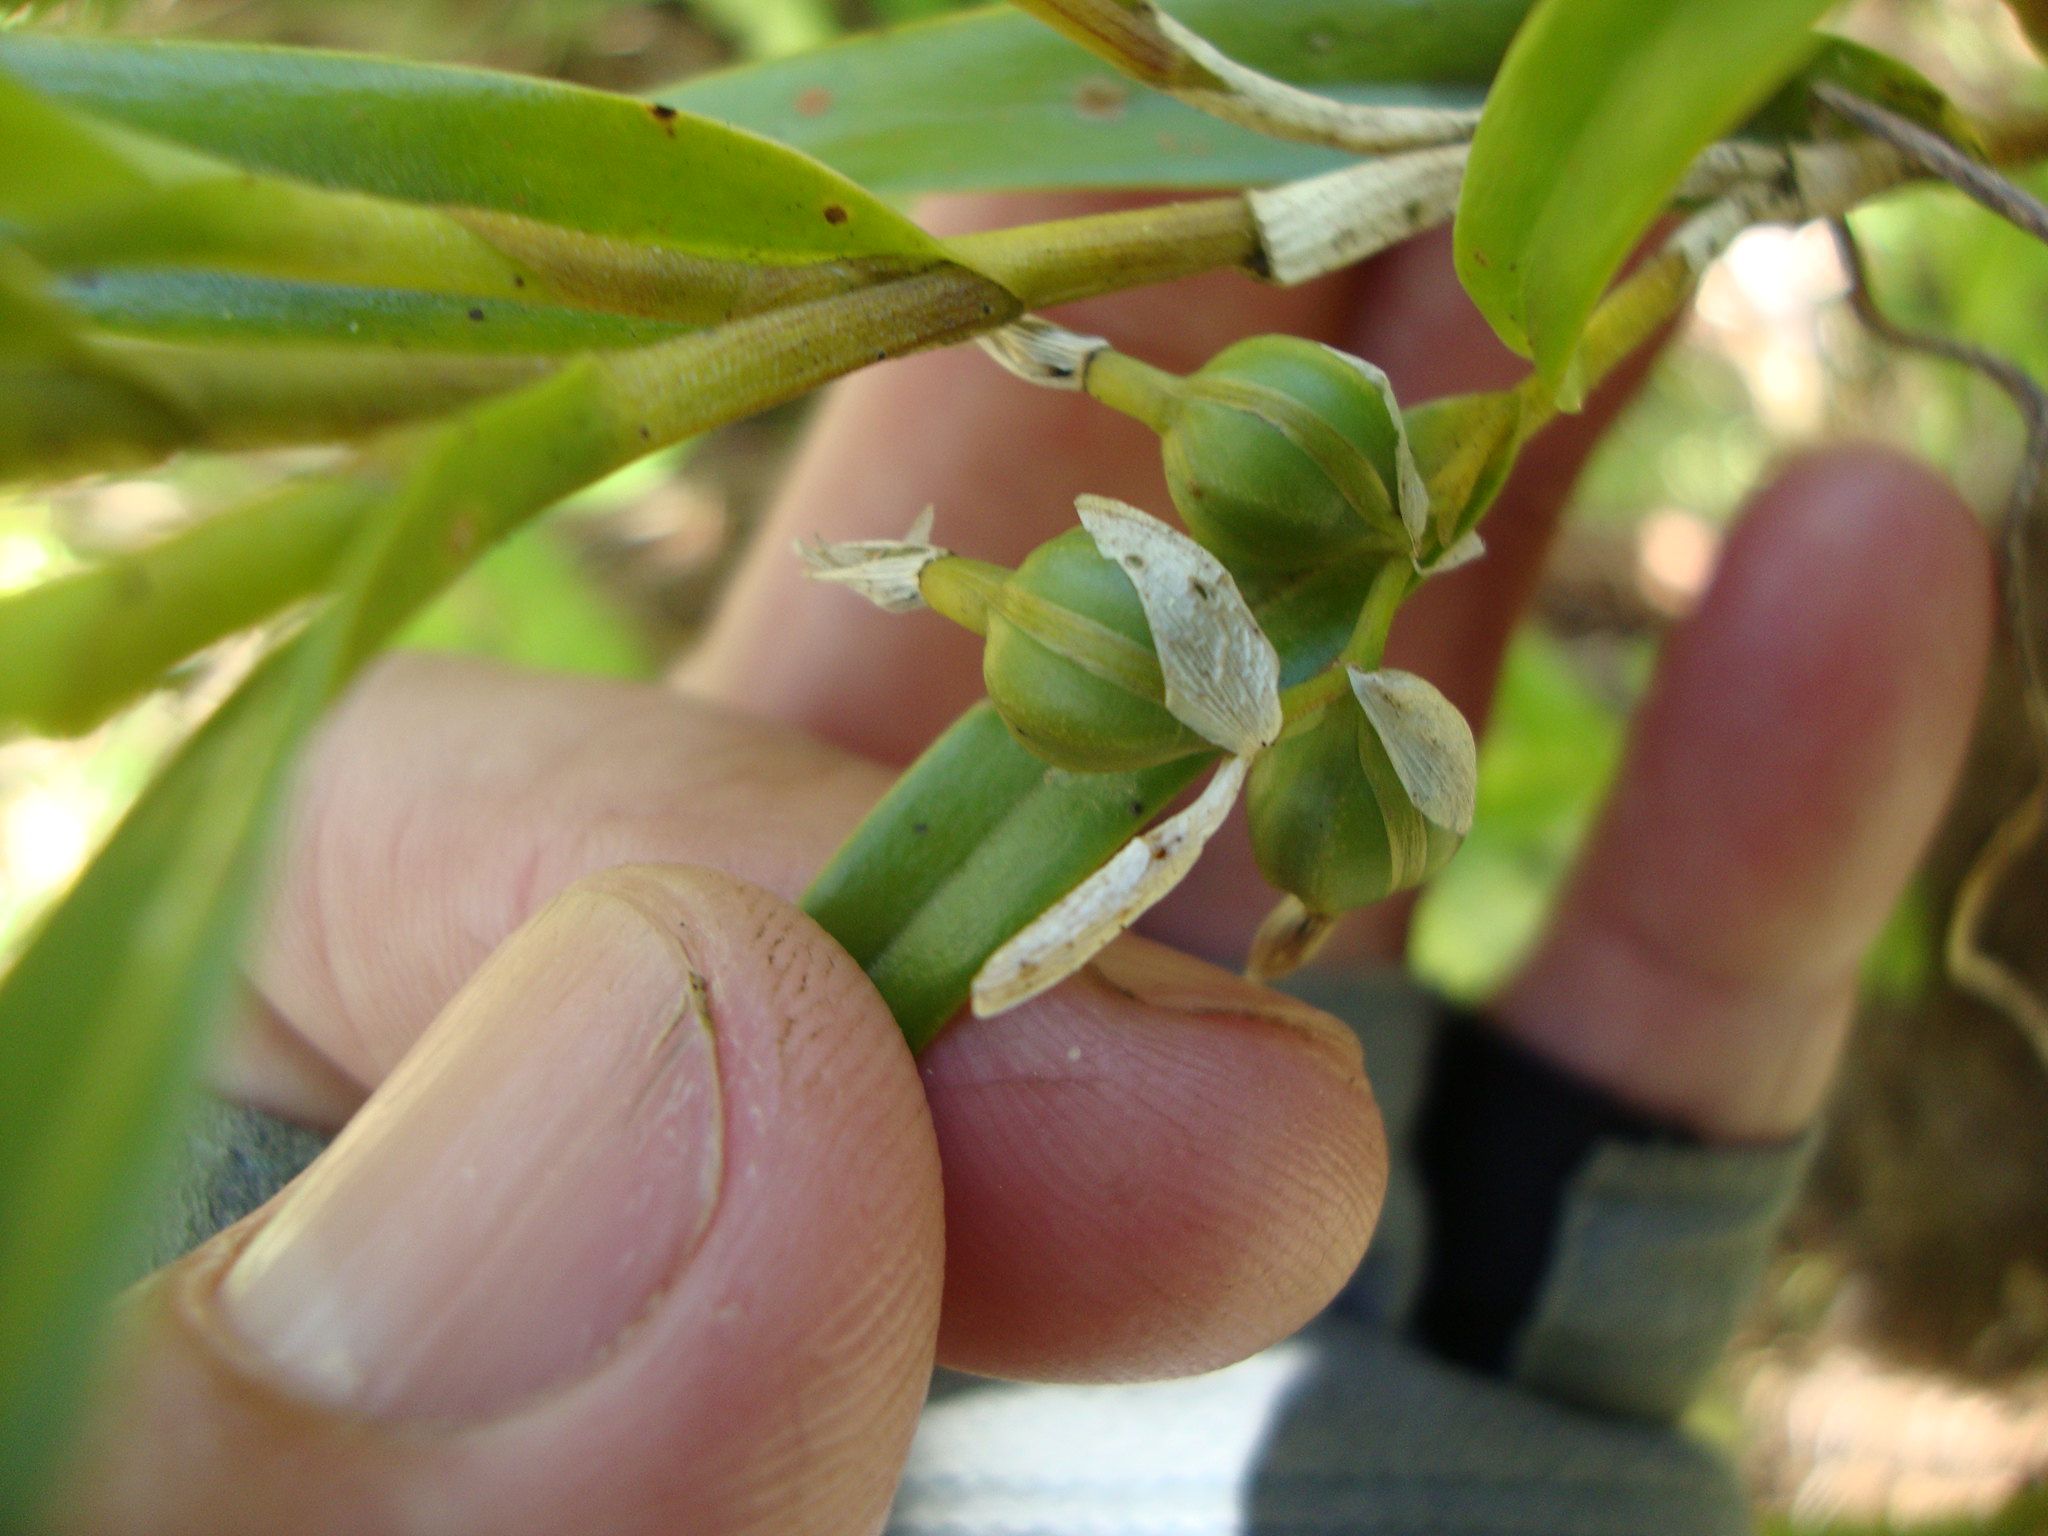 orchid seed capsule